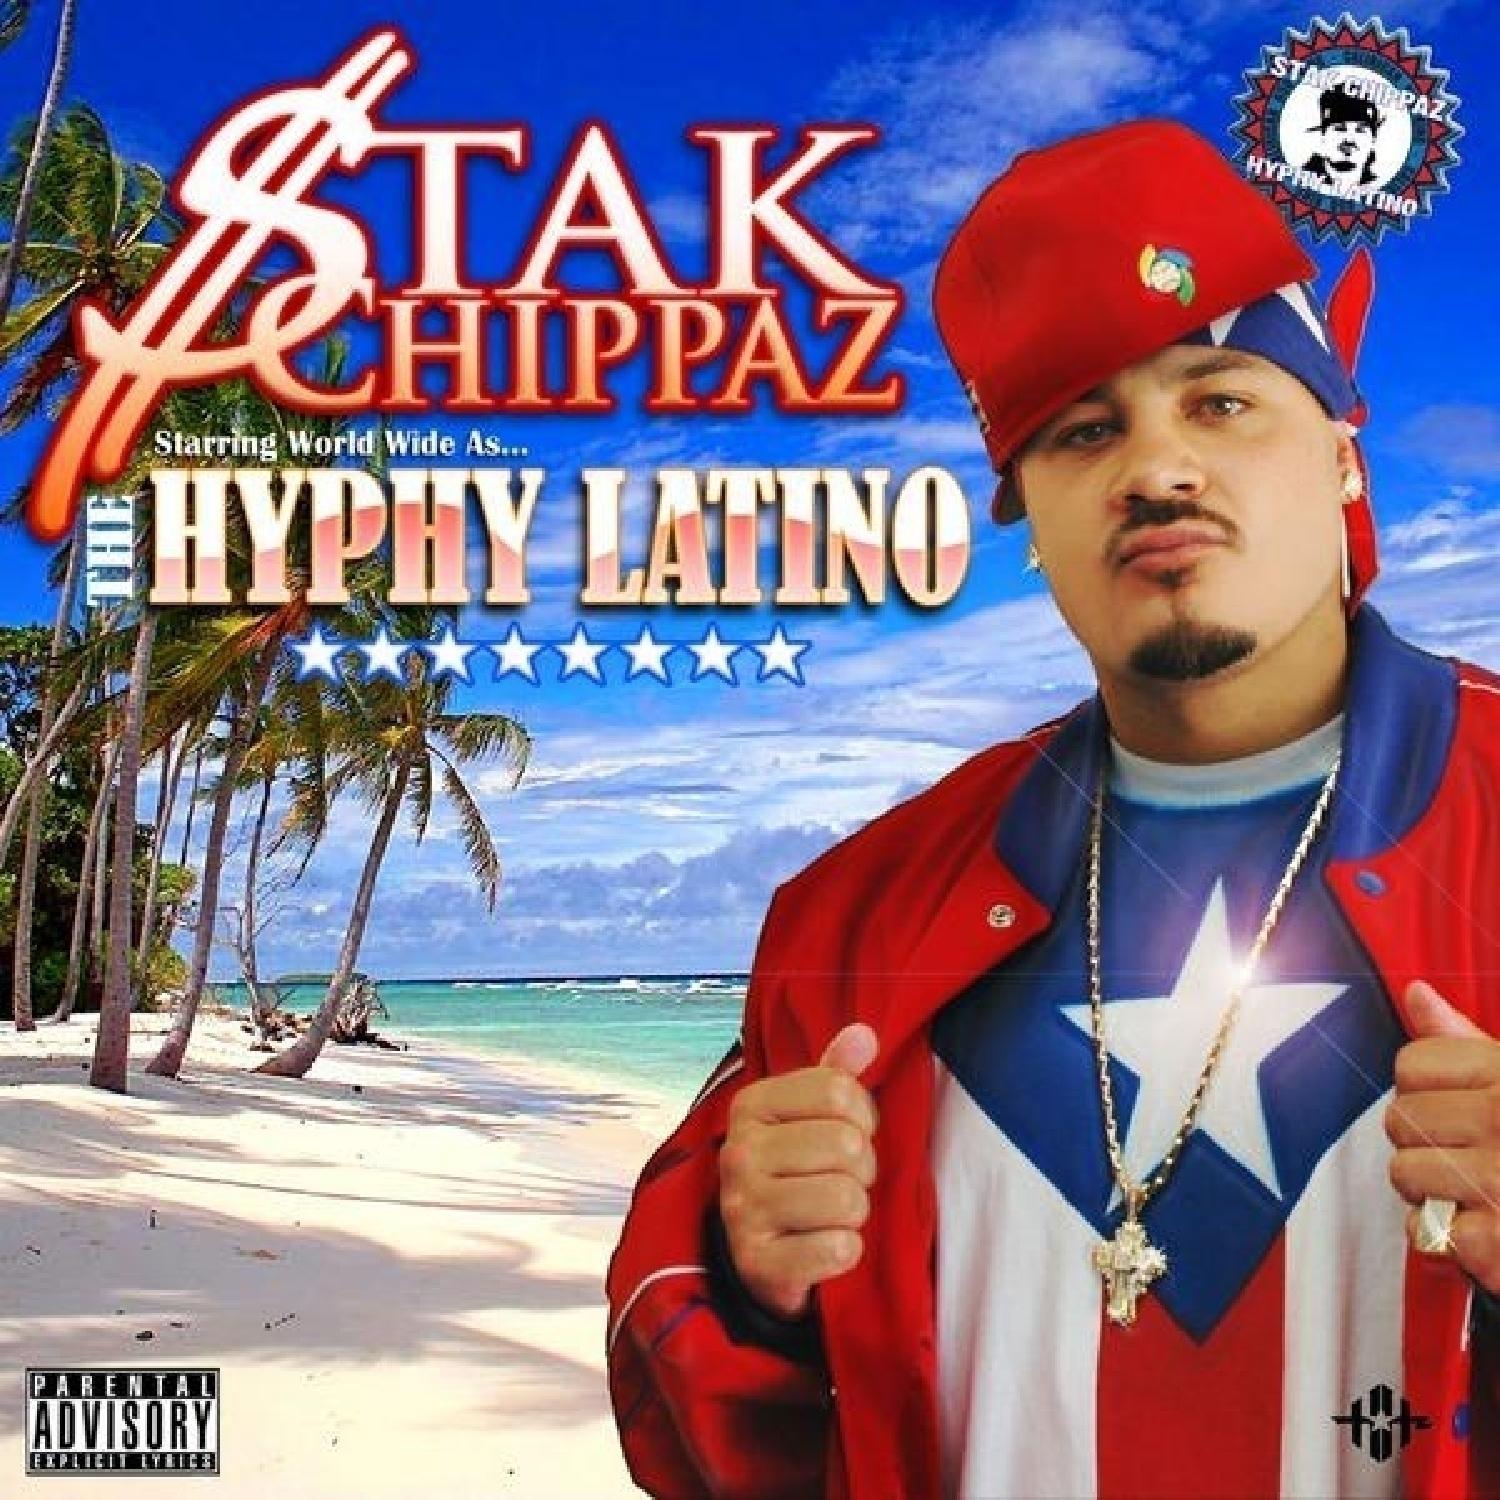 The Hyphy Latino